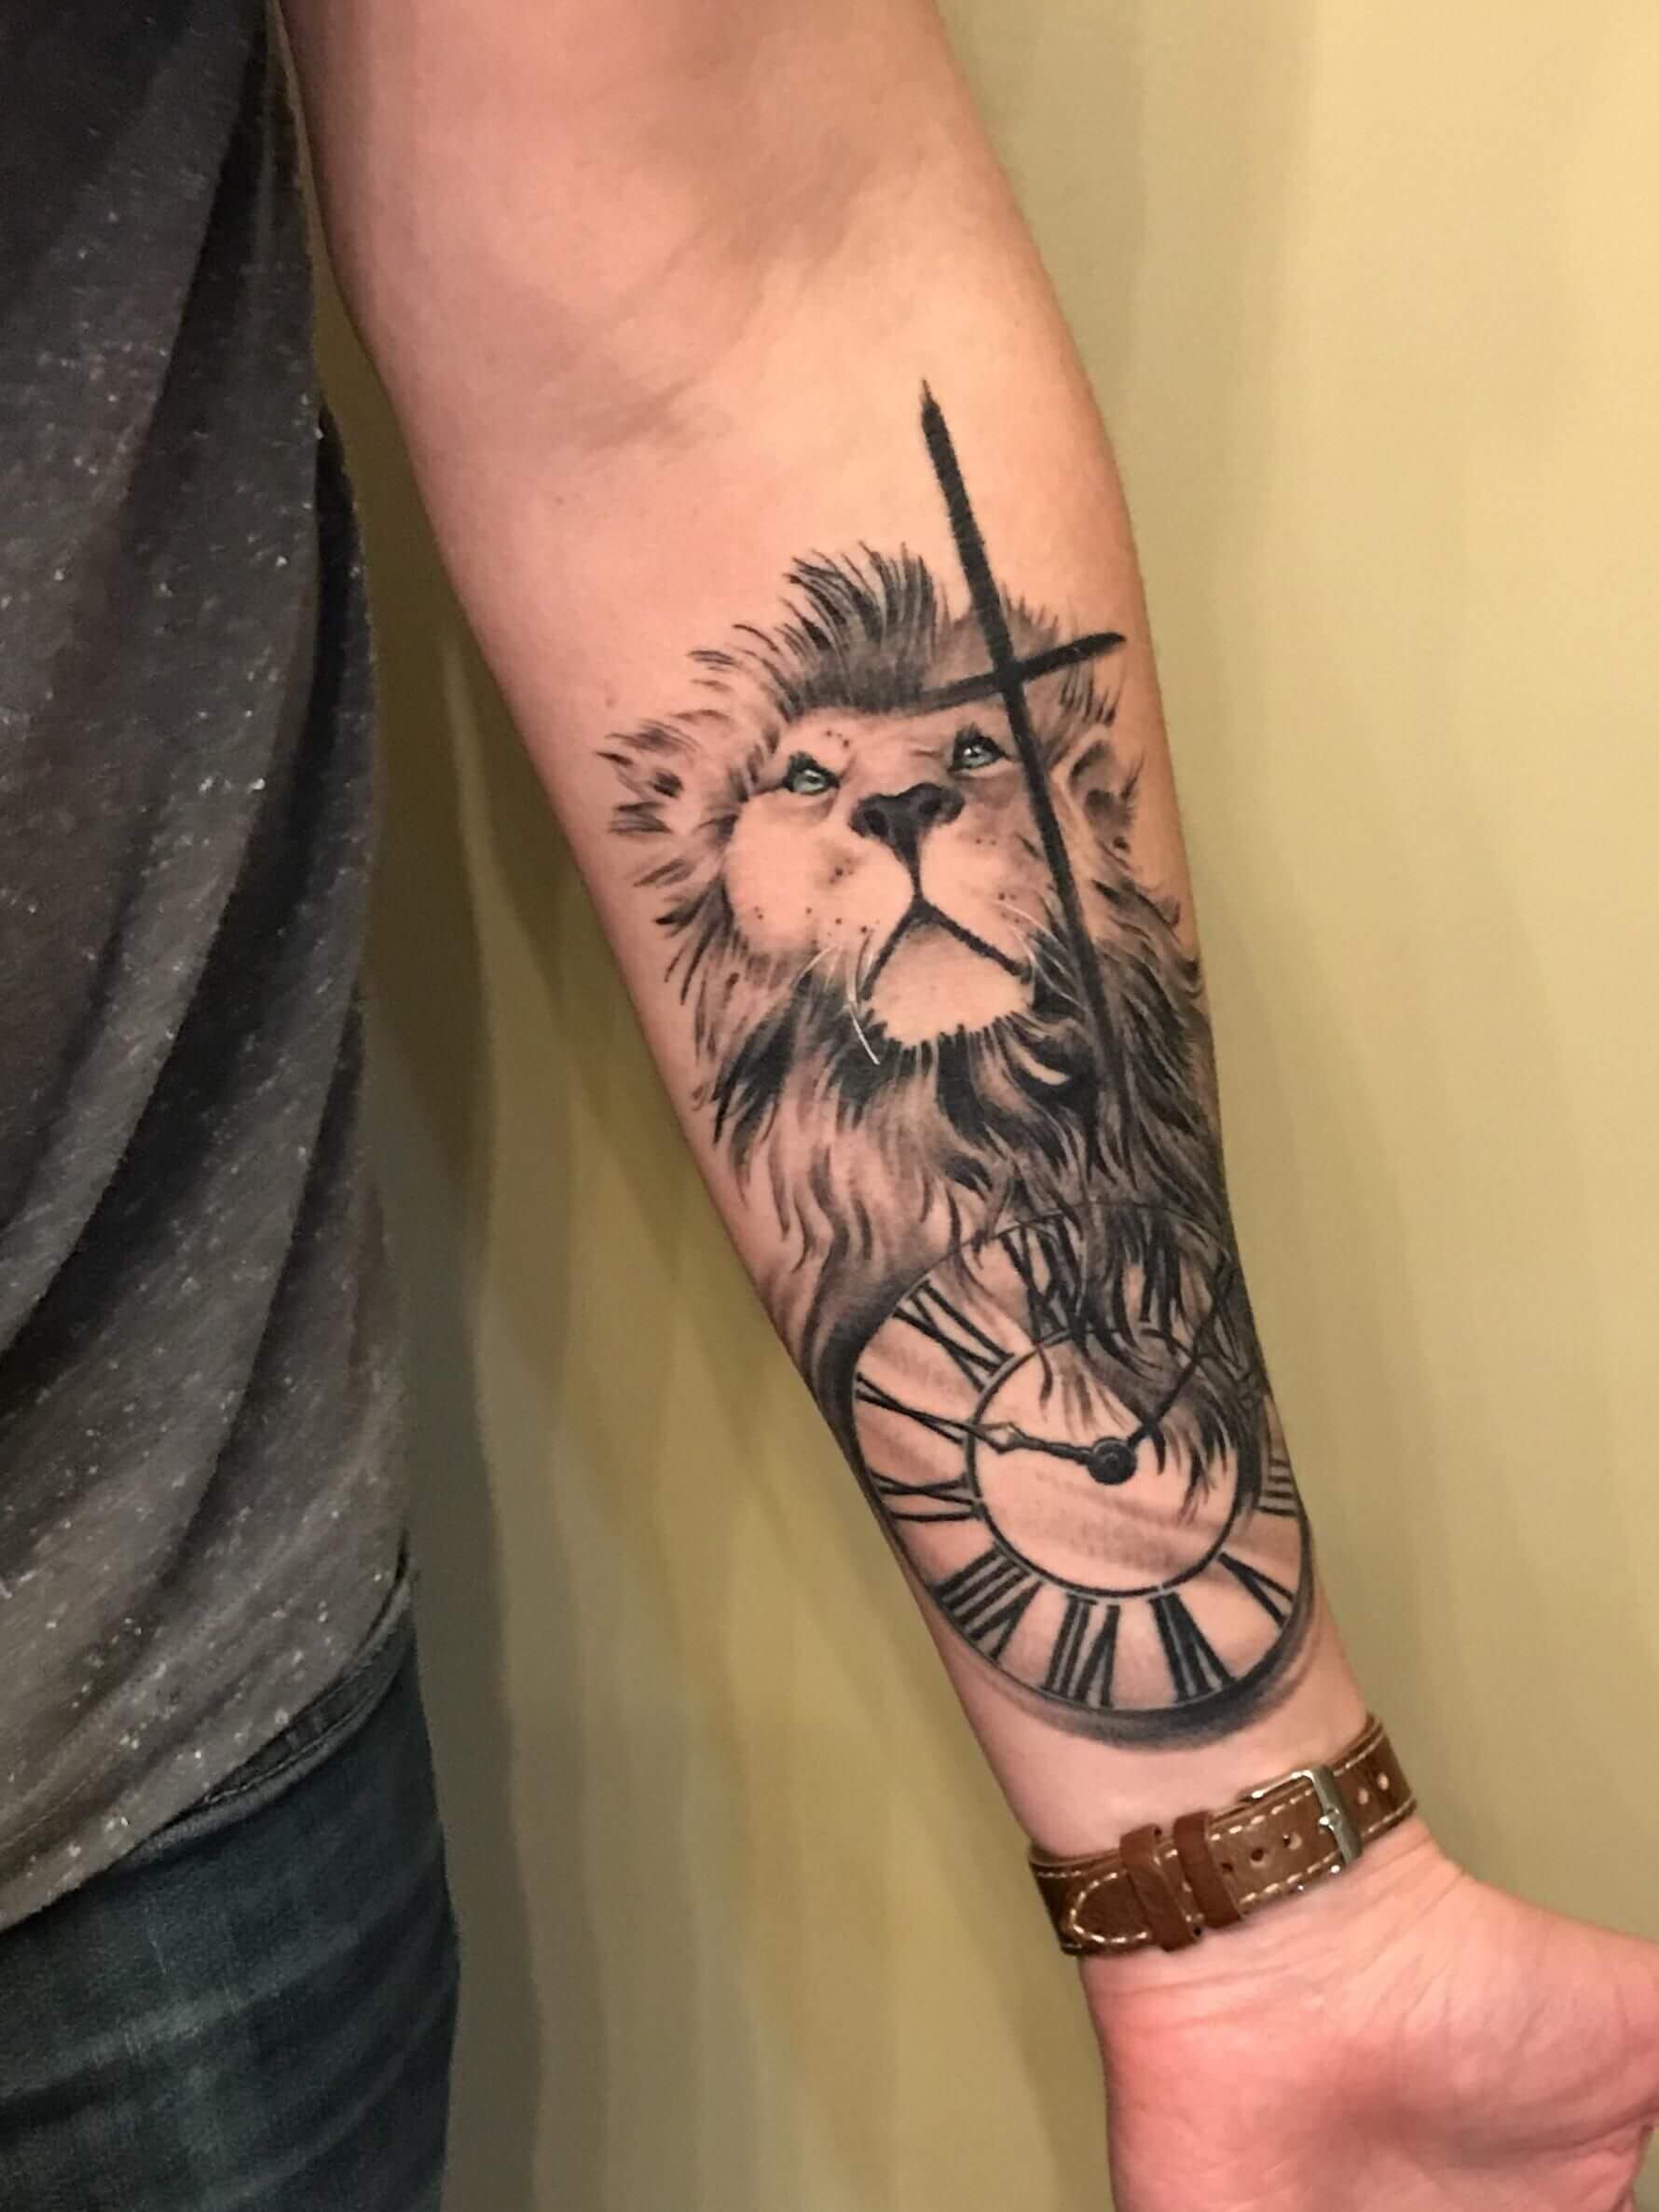 Learn 98+ about lion tattoo ideas super cool .vn